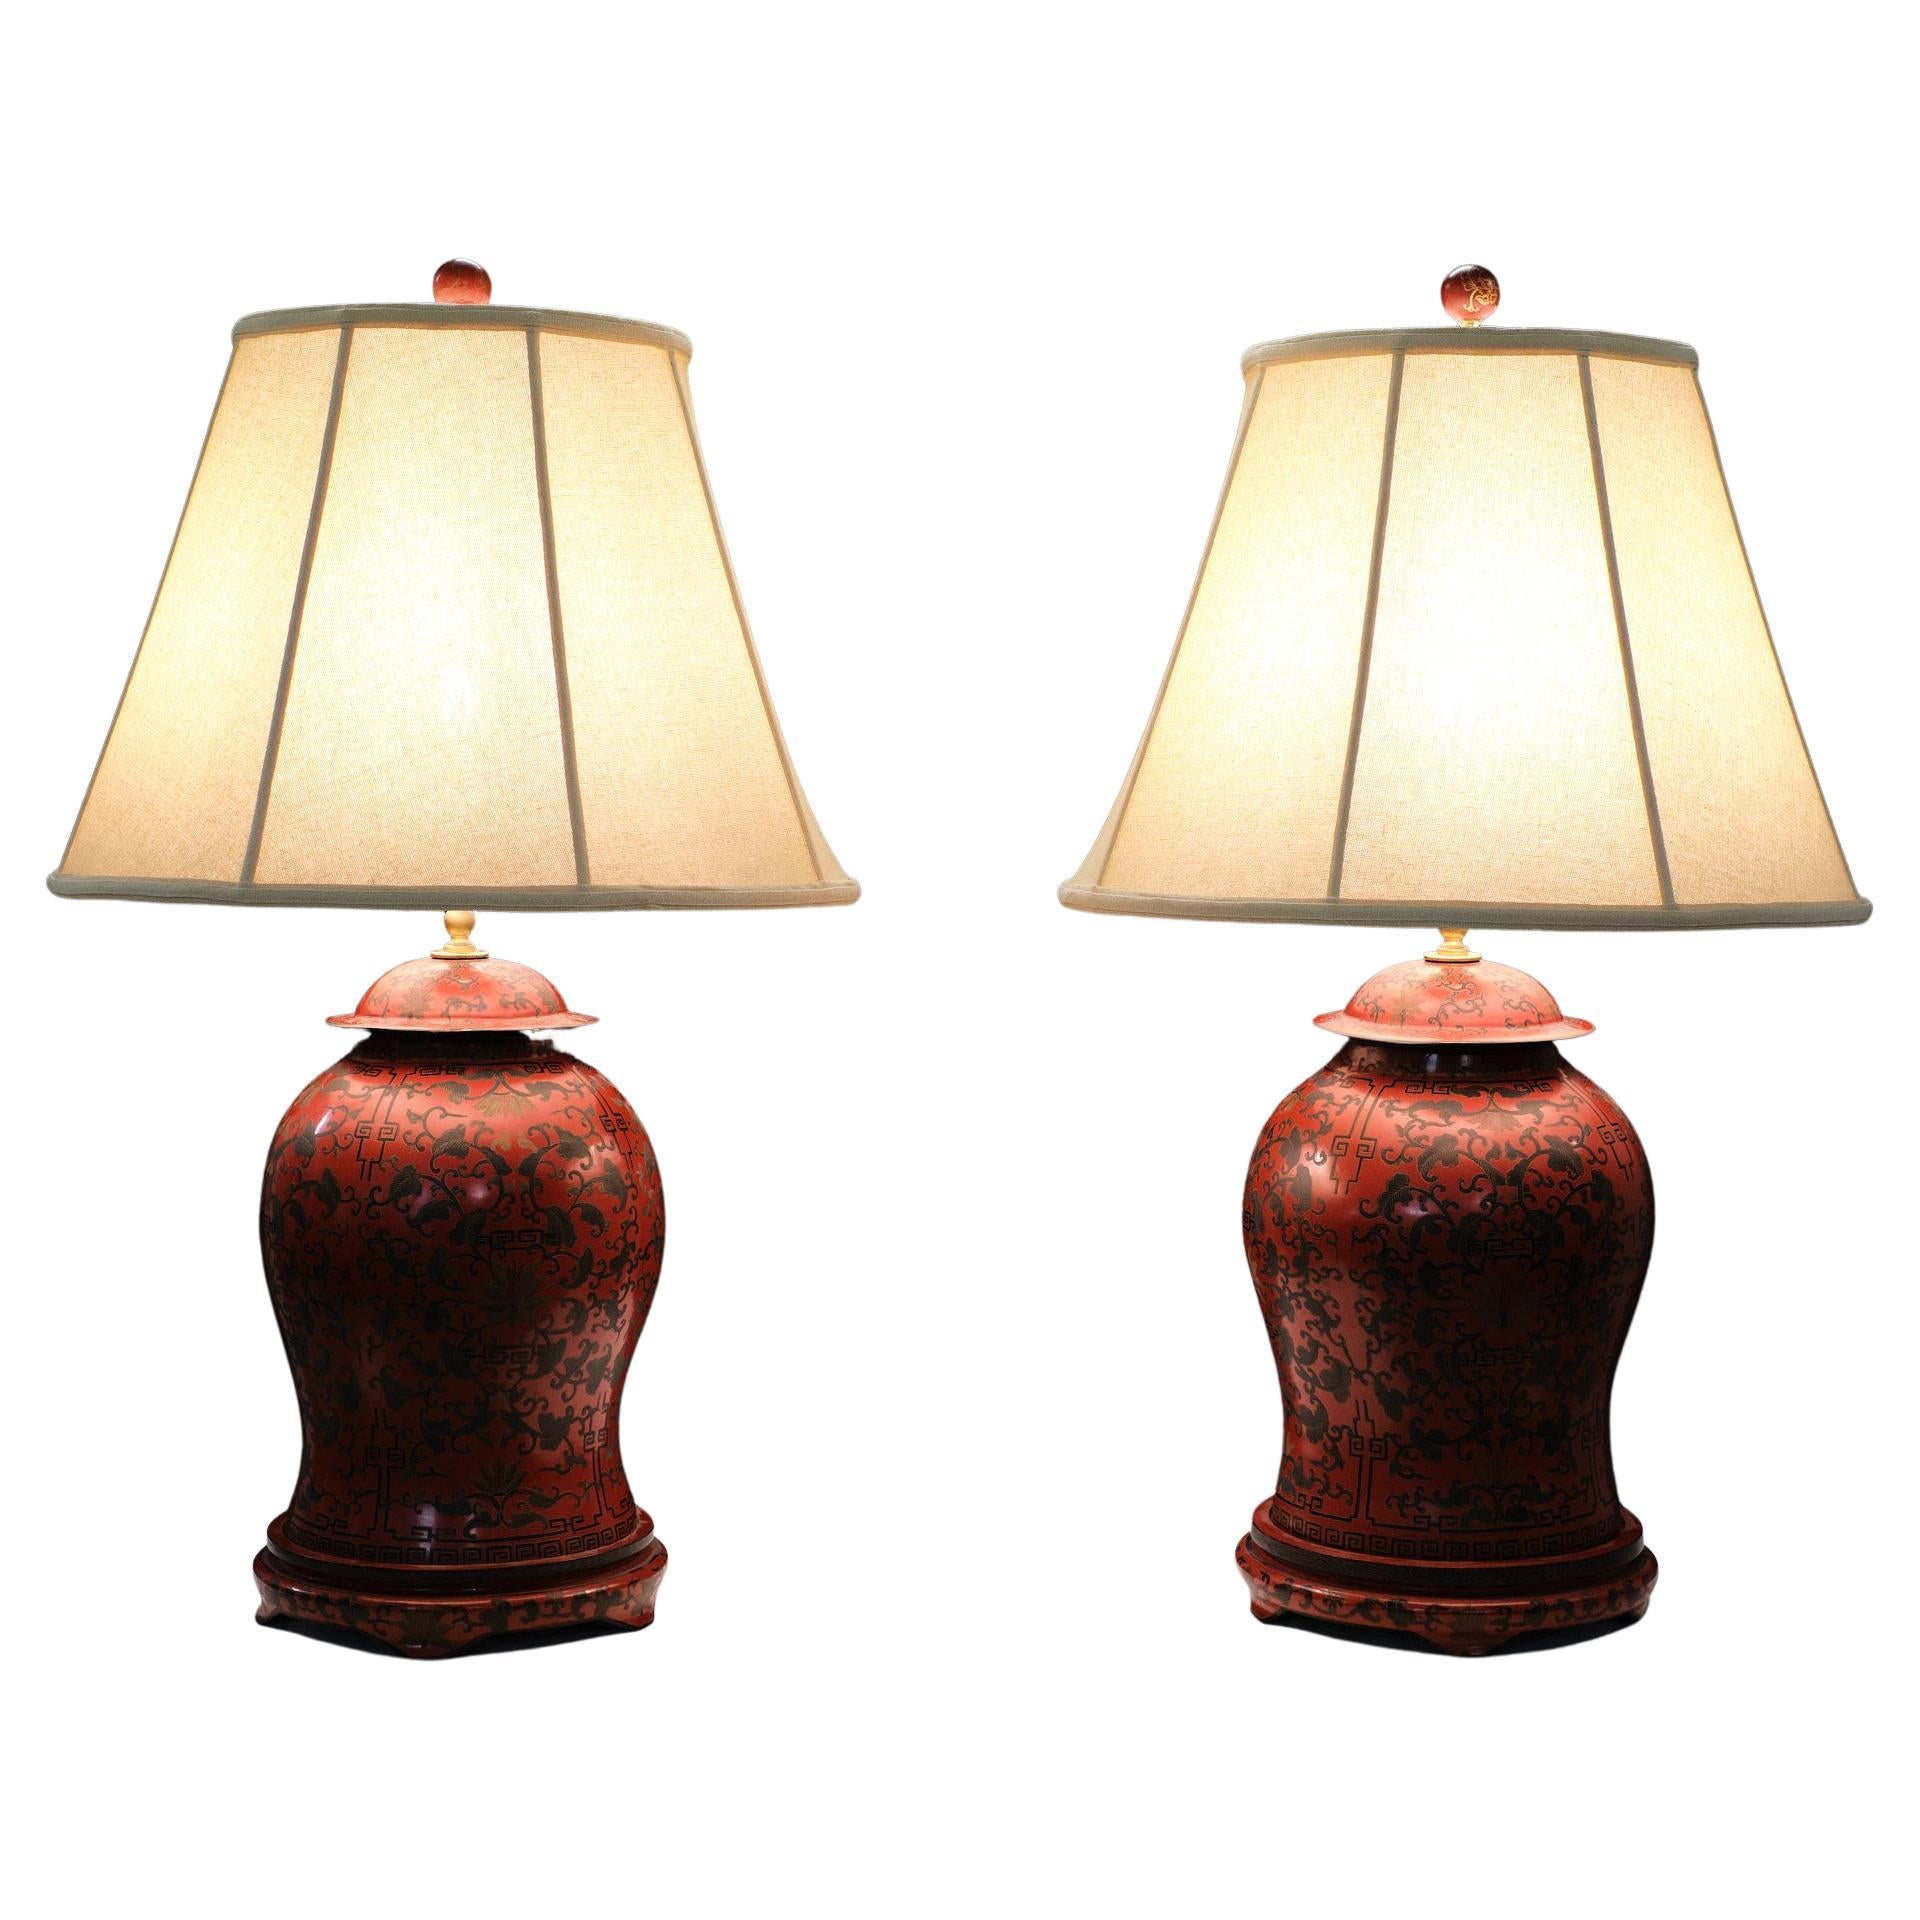 Stunning set of large Wooden Chinese table lamps . 
Classic Red and Black , formed and proportioned  temple jars wired as lamps.
Hand carved Flower motif comes with beautiful original hand made shade .
One large E27 bulb needed each. Switch on the